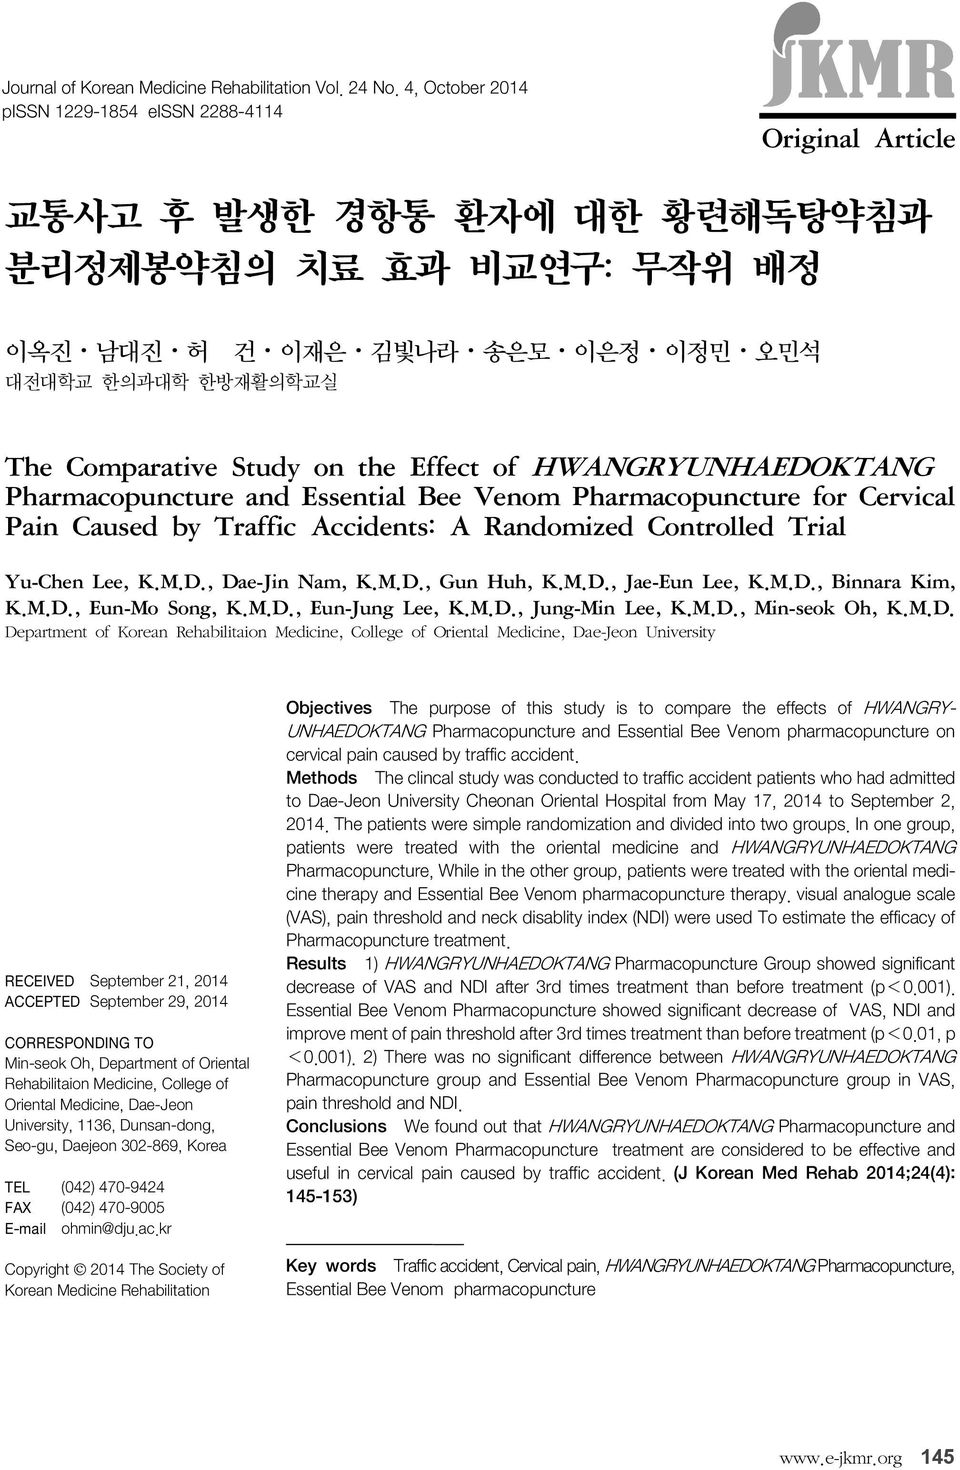 Study on the Effect of HWANGRYUNHAEDOKTANG Pharmacopuncture and Essential Bee Venom Pharmacopuncture for Cervical Pain Caused by Traffic Accidents: A Randomized Controlled Trial Yu-Chen Lee, K.M.D., Dae-Jin Nam, K.